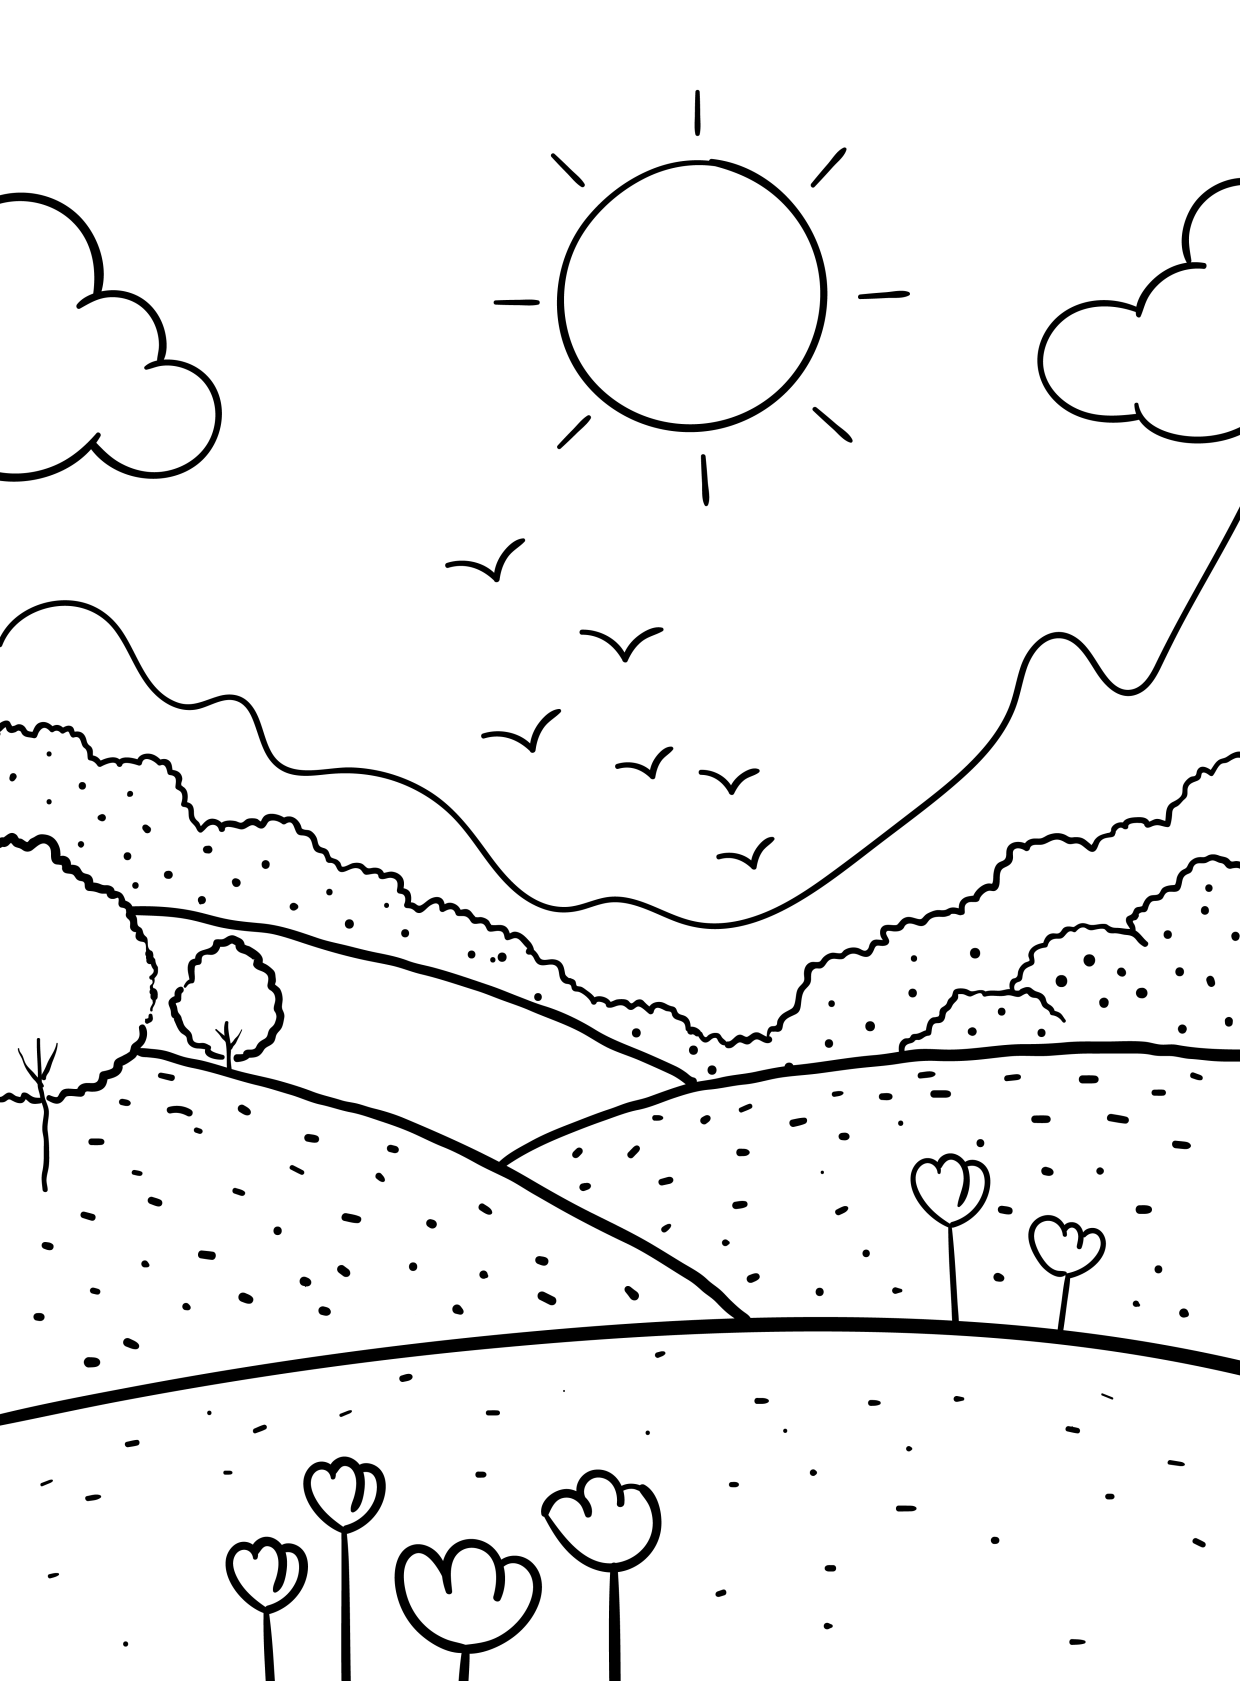 Scenic Coloring Pages